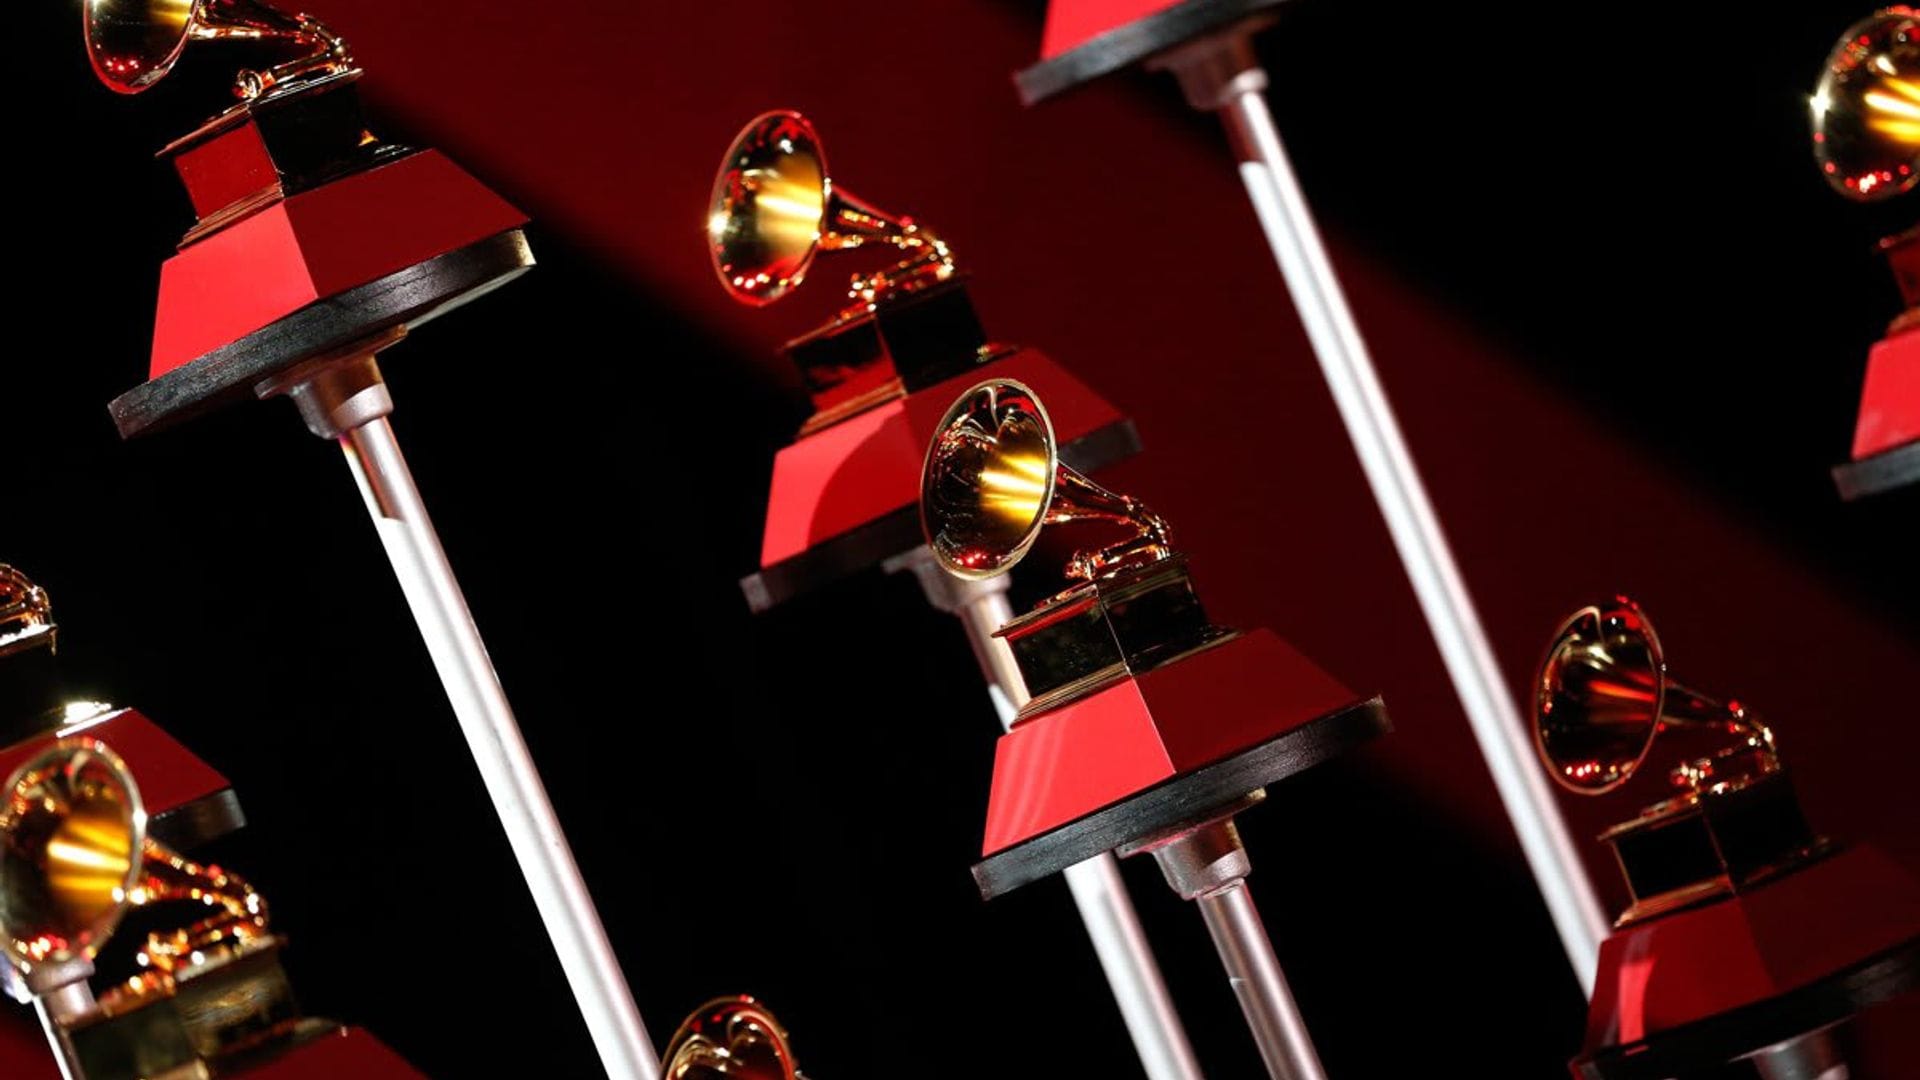 There’s a special collaboration happening off stage at the 2021 Latin Grammys: Details